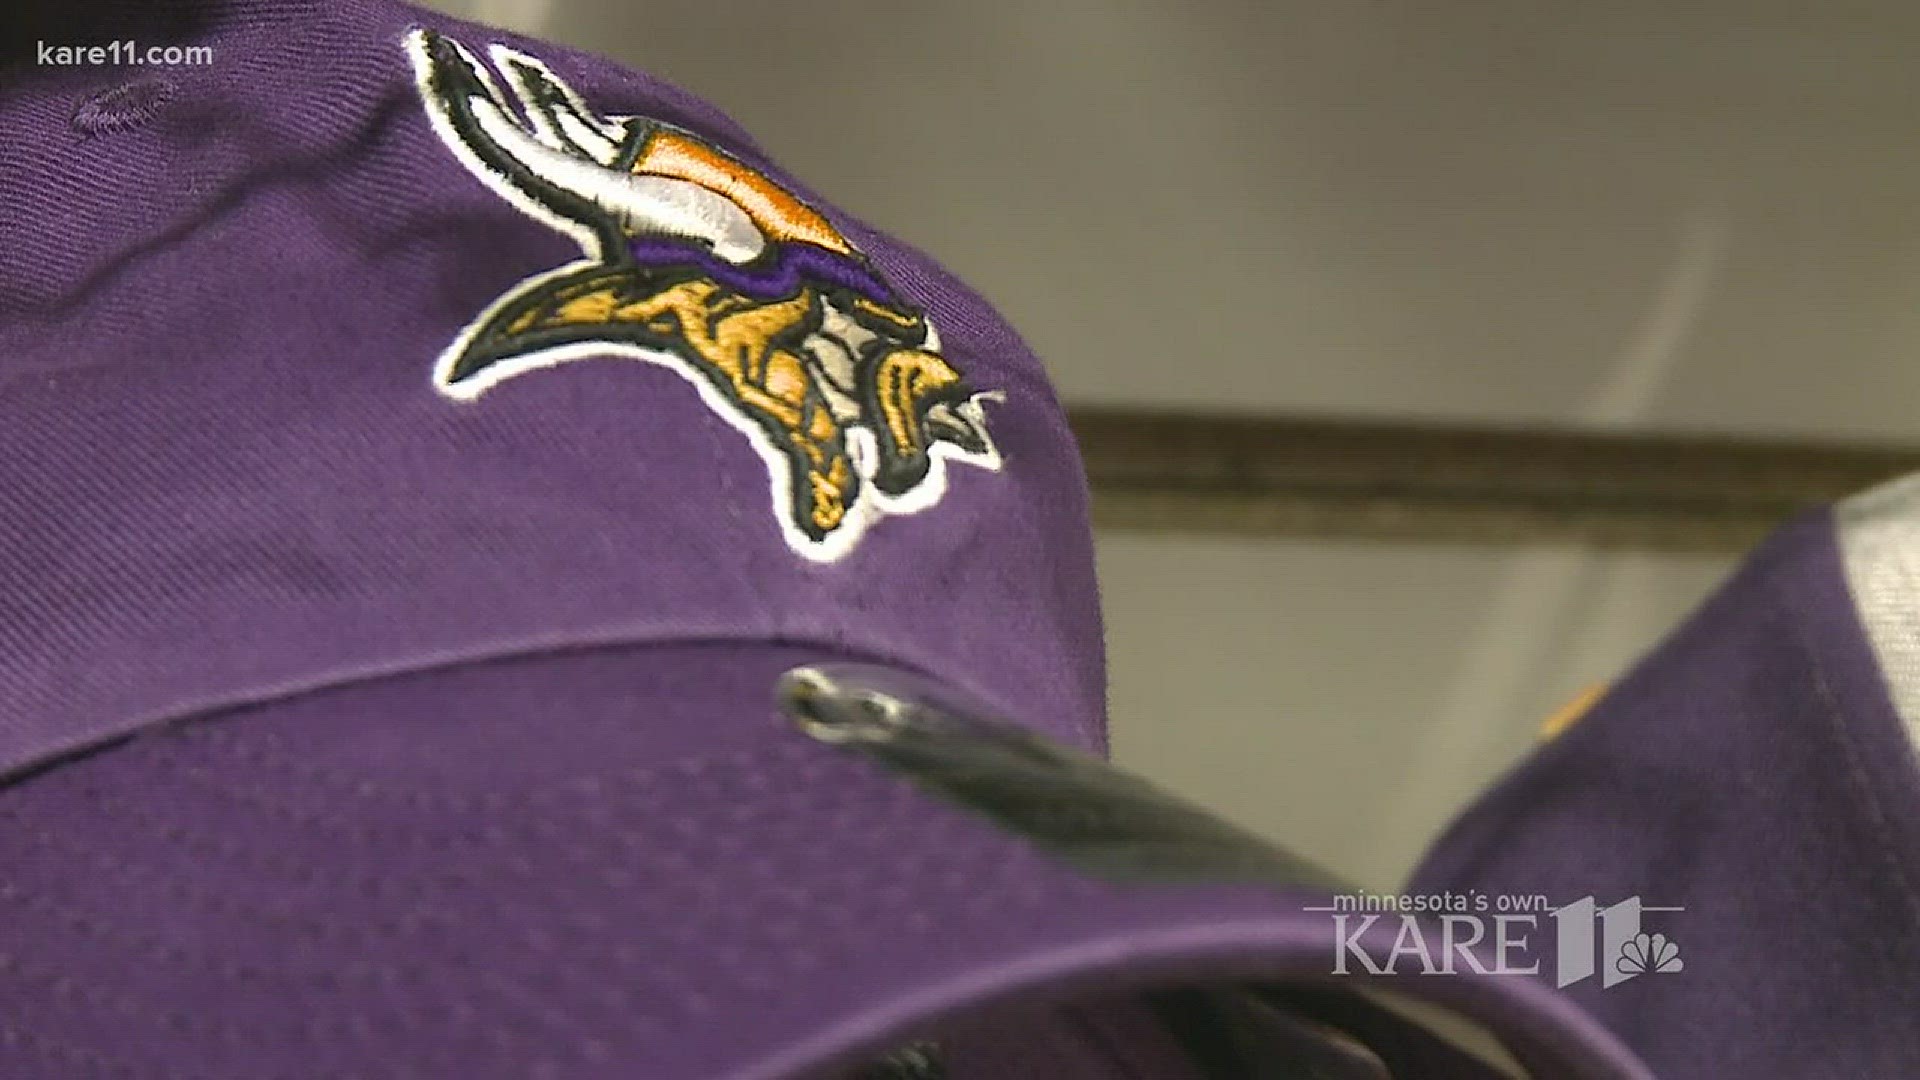 Diehard fans have been waiting for a Vikings season like this for years--but some people are just jumping on the bandwagon now. The first step for them -- is getting decked out in Vikings gear before Sunday.